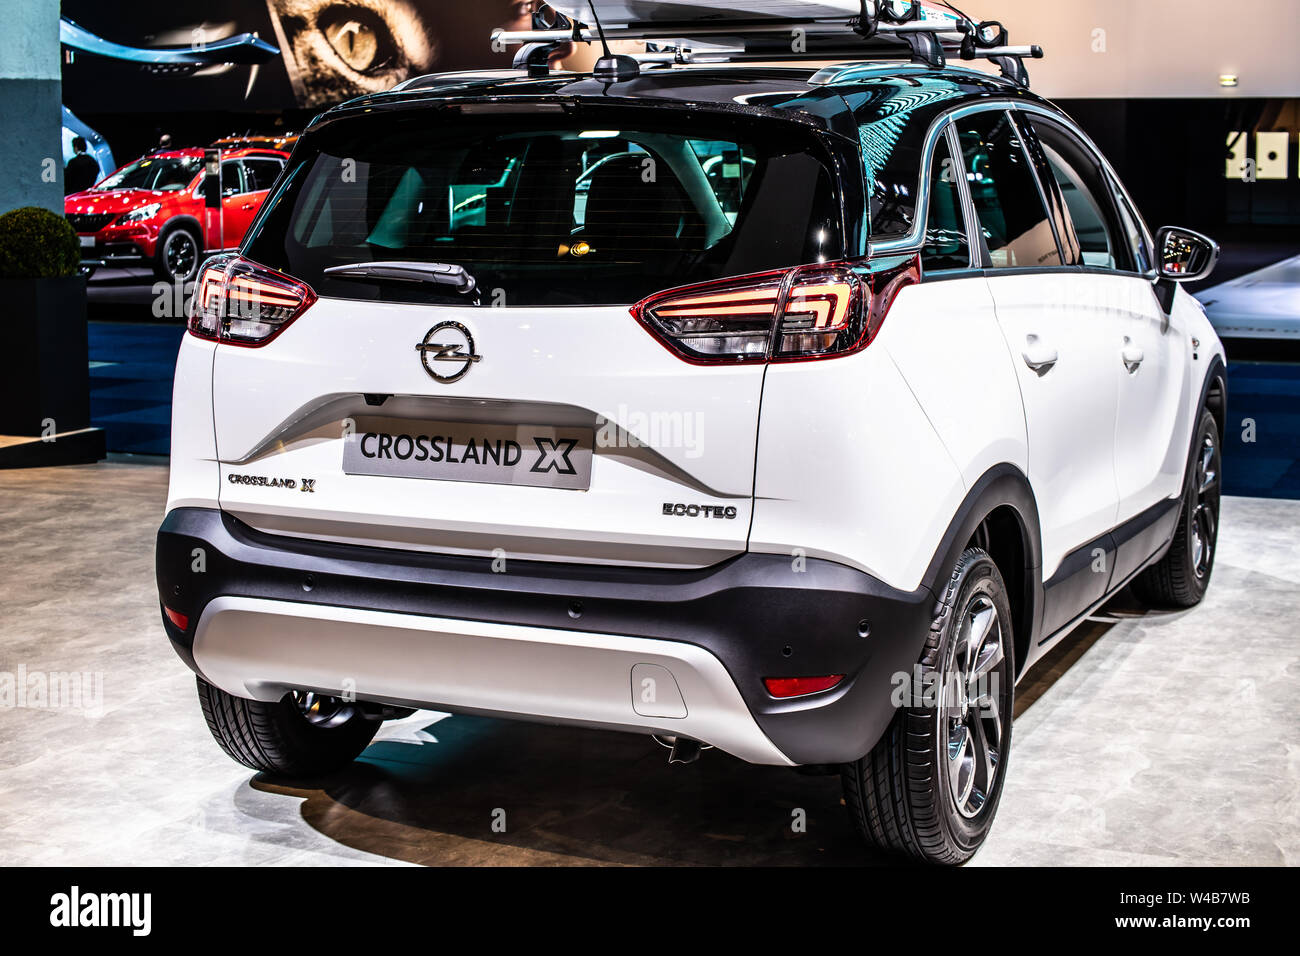 https://c8.alamy.com/comp/W4B7WB/brussels-belgium-jan-2019-metallic-white-opel-crossland-x-at-brussels-motor-show-subcompact-crossover-suv-produced-by-opel-psa-group-W4B7WB.jpg